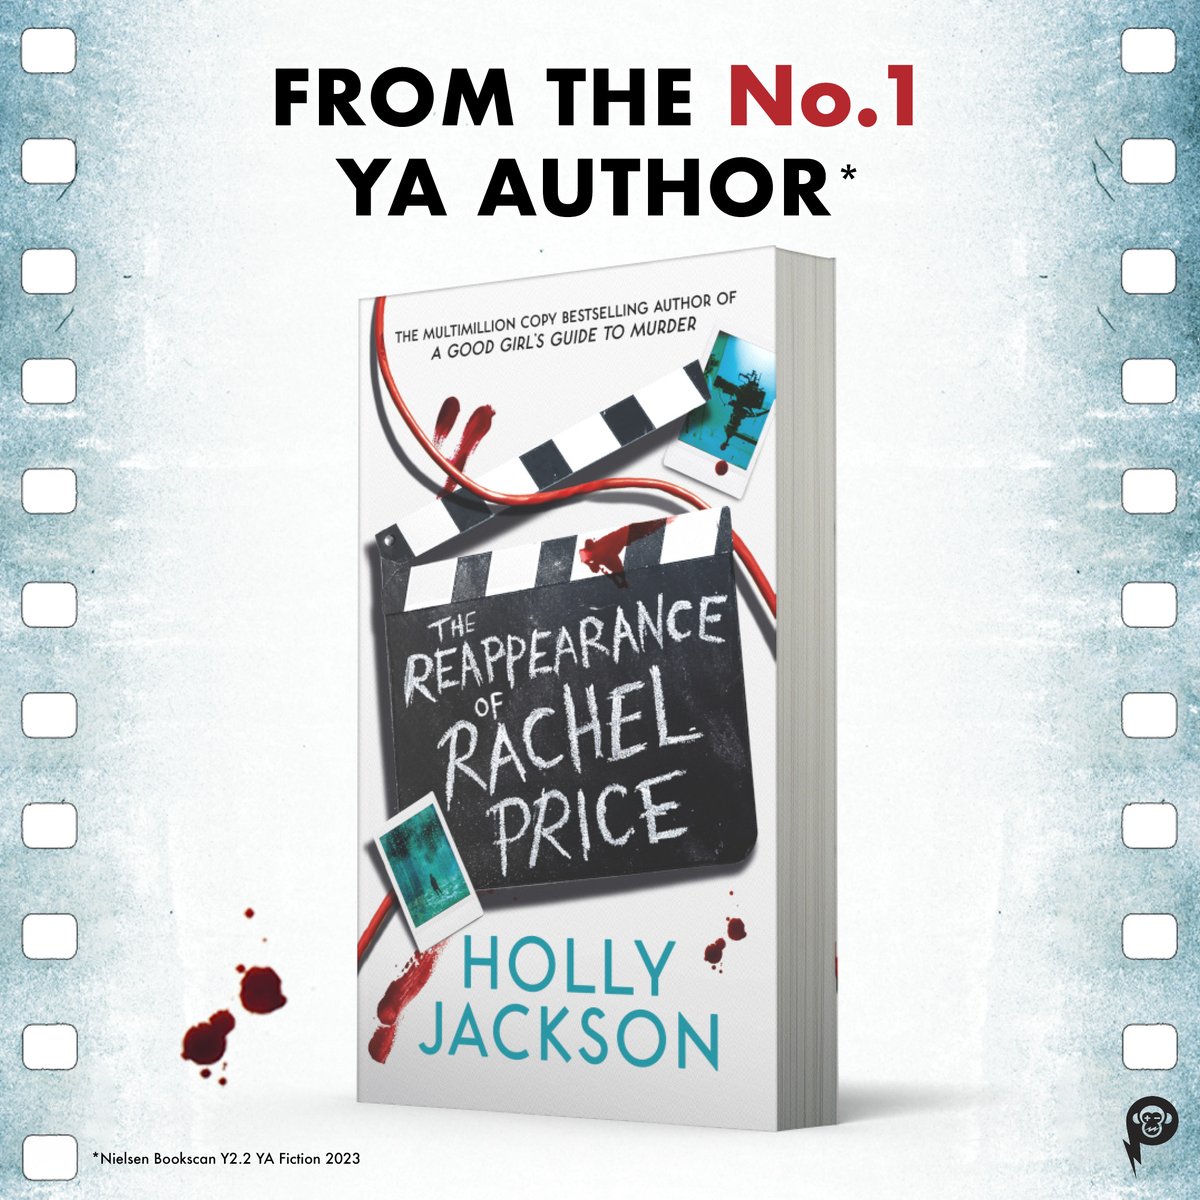 New from Holly Jackson! Mega-bestselling author of A Good Girl’s Guide to Murder is back with a brand-new thriller!